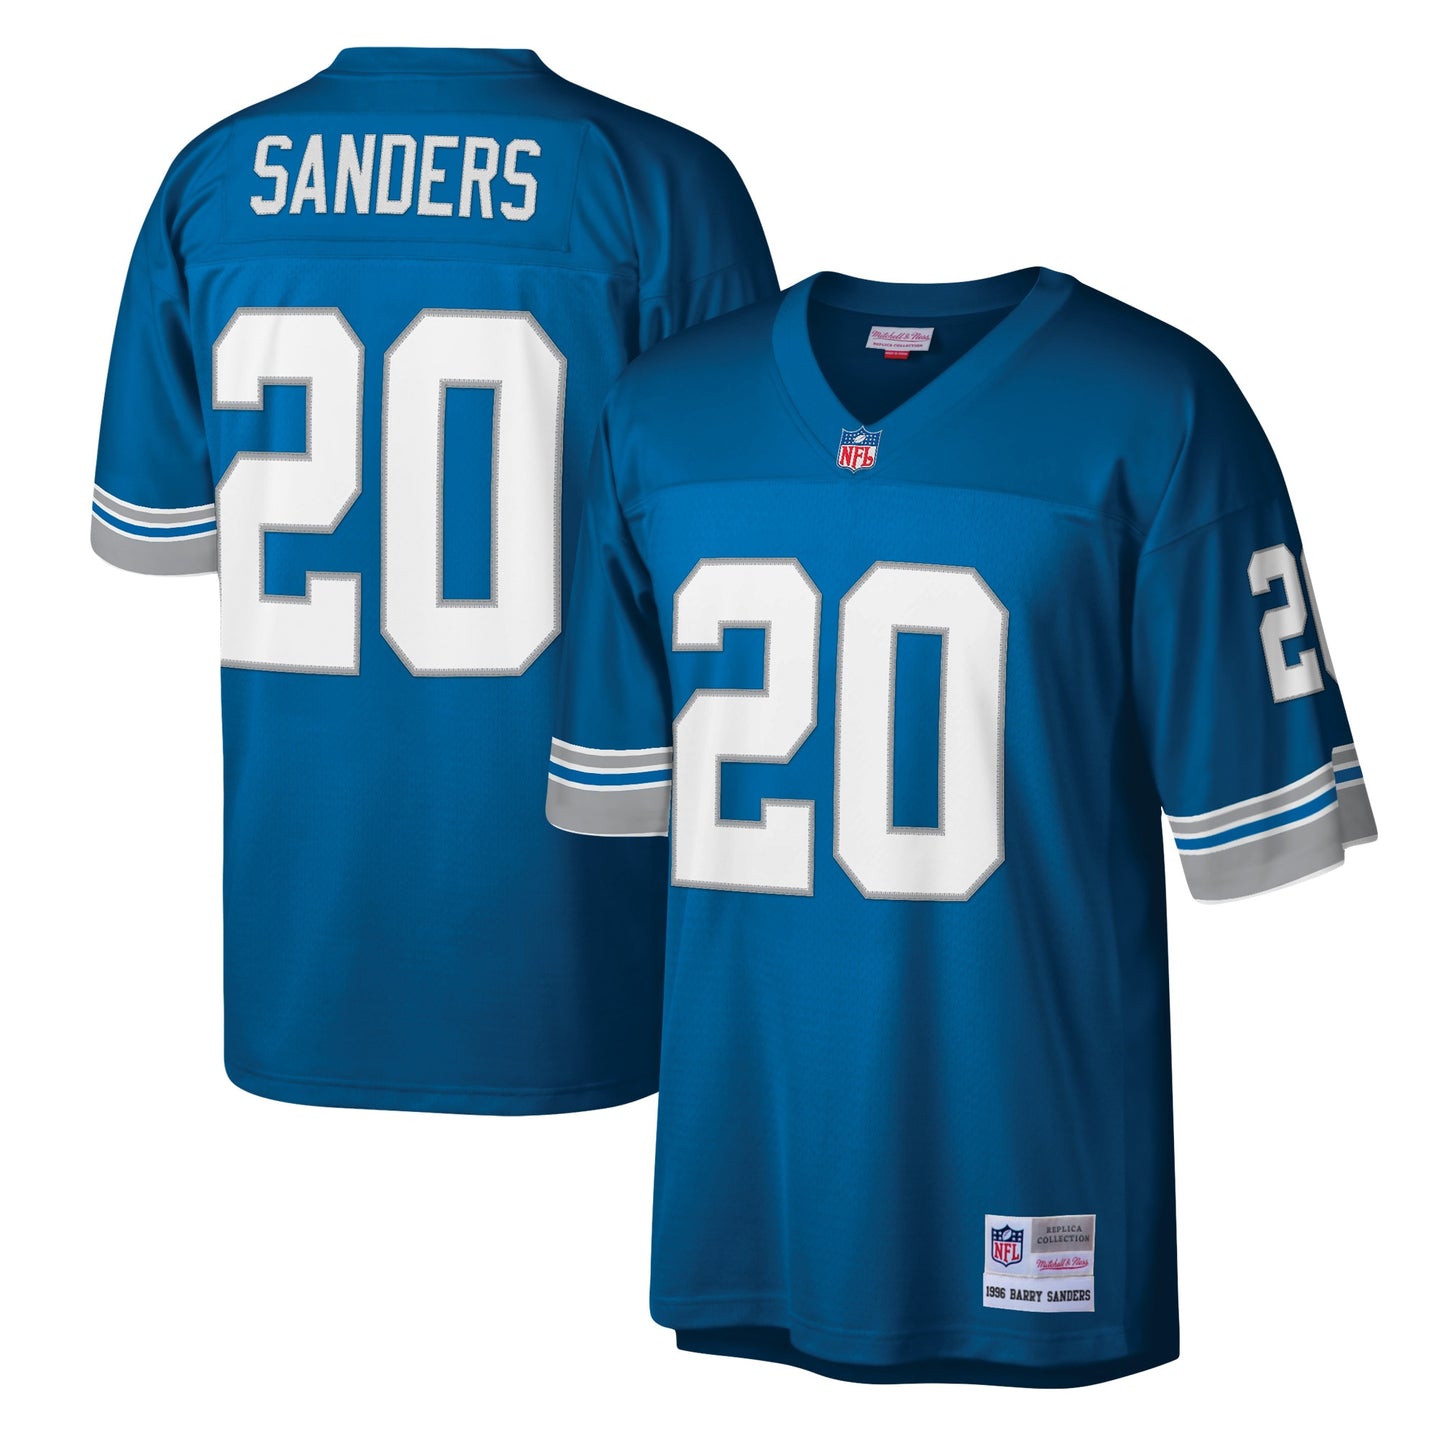 Barry Sanders Detroit Lions Mitchell & Ness Legacy Replica Jersey - Blue